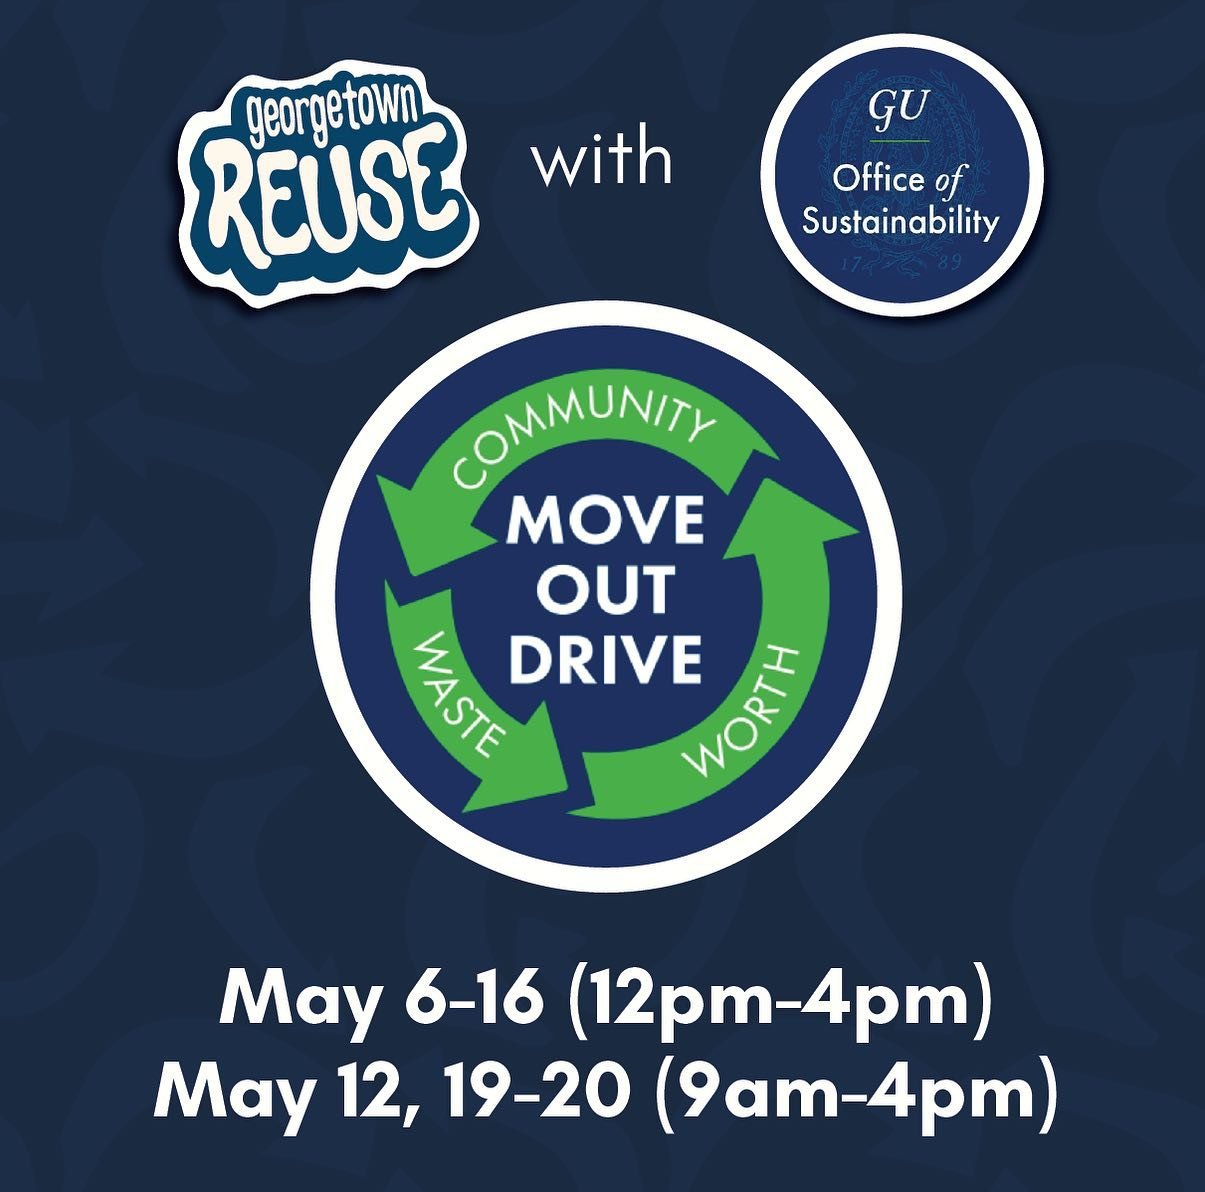 STARTING TODAY! As you clean out your dorms and make your way off campus, be sure to donate any items you no longer need at the Move Out Drive locations around campus. We&rsquo;ll be accepting donations of clothing, dorm materials, appliances, and mo